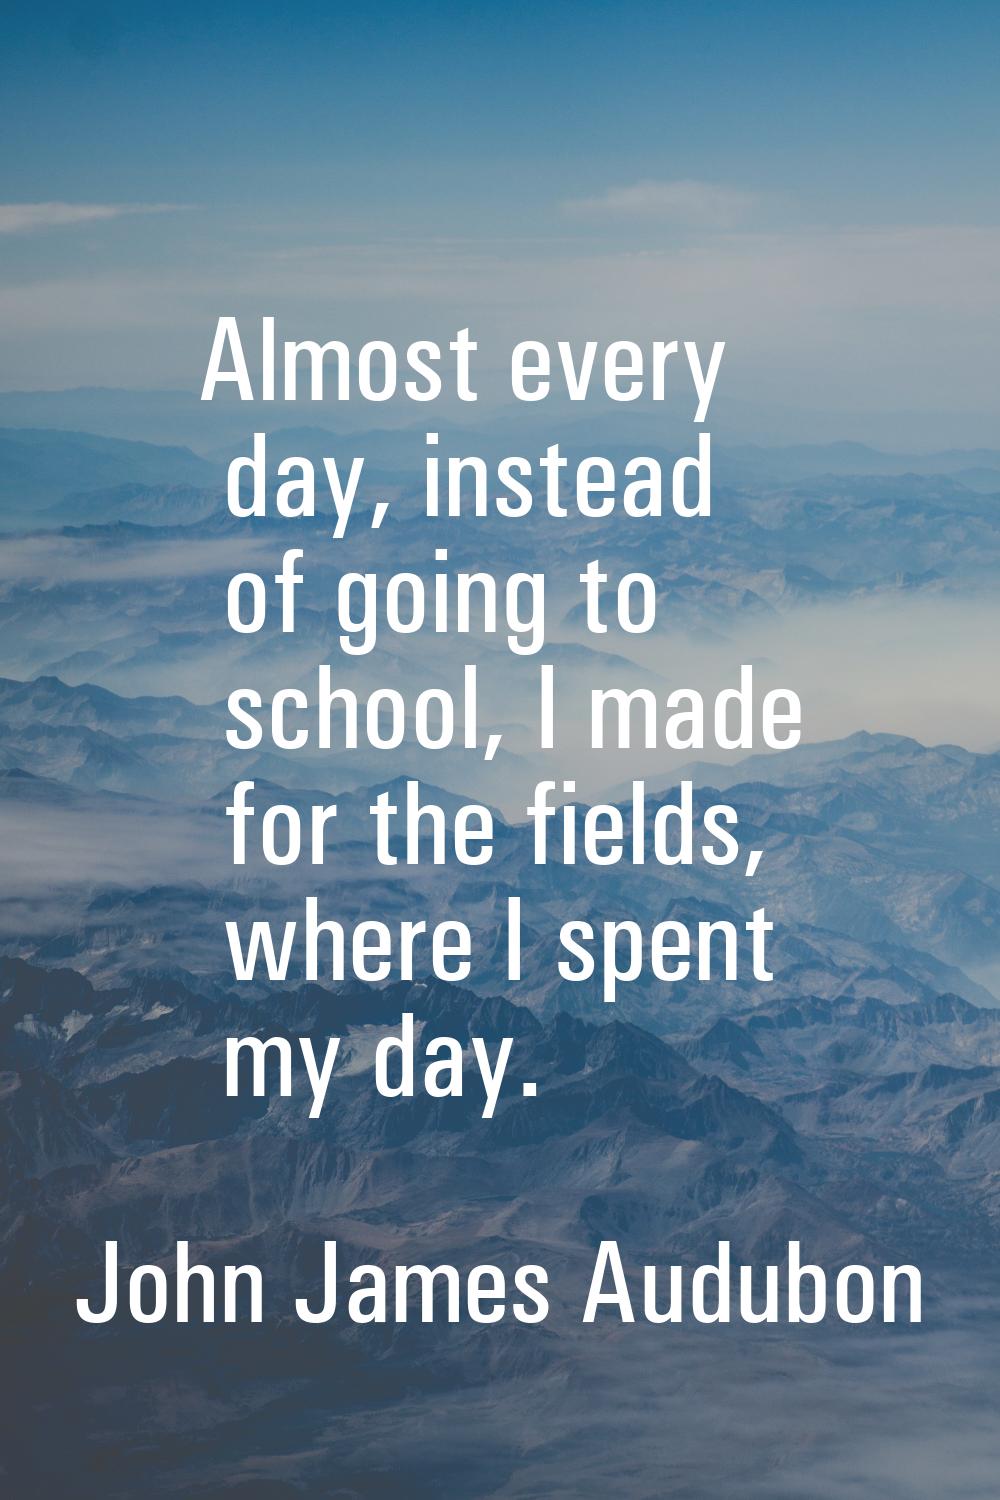 Almost every day, instead of going to school, I made for the fields, where I spent my day.